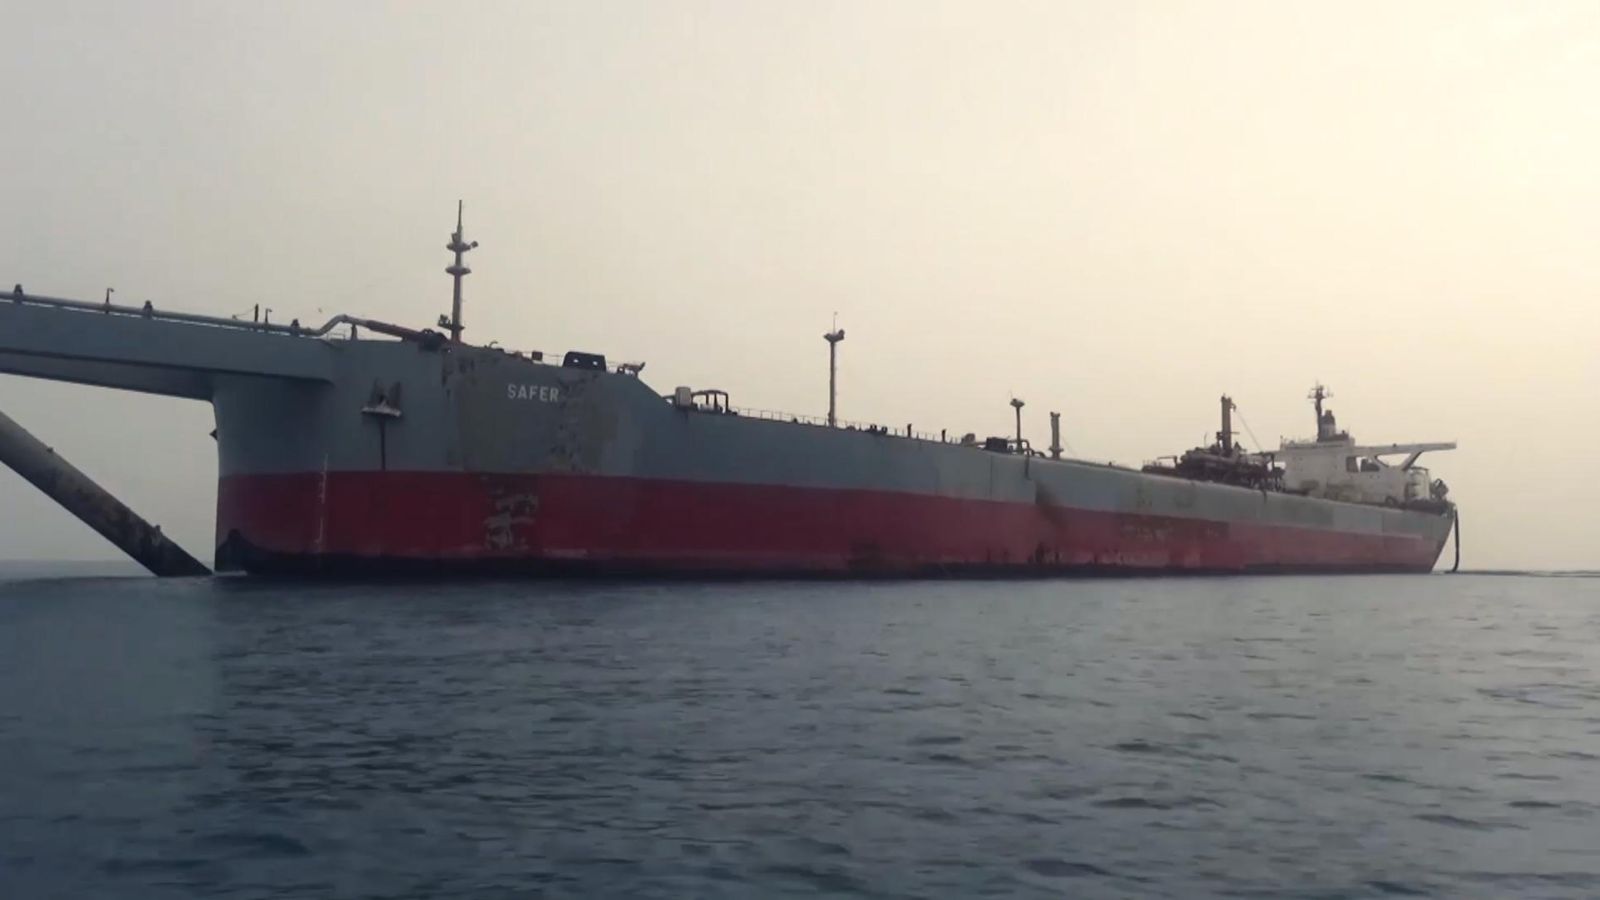 Super tanker anchored off Yemen coast is likely to sink or explode at any moment, UN says